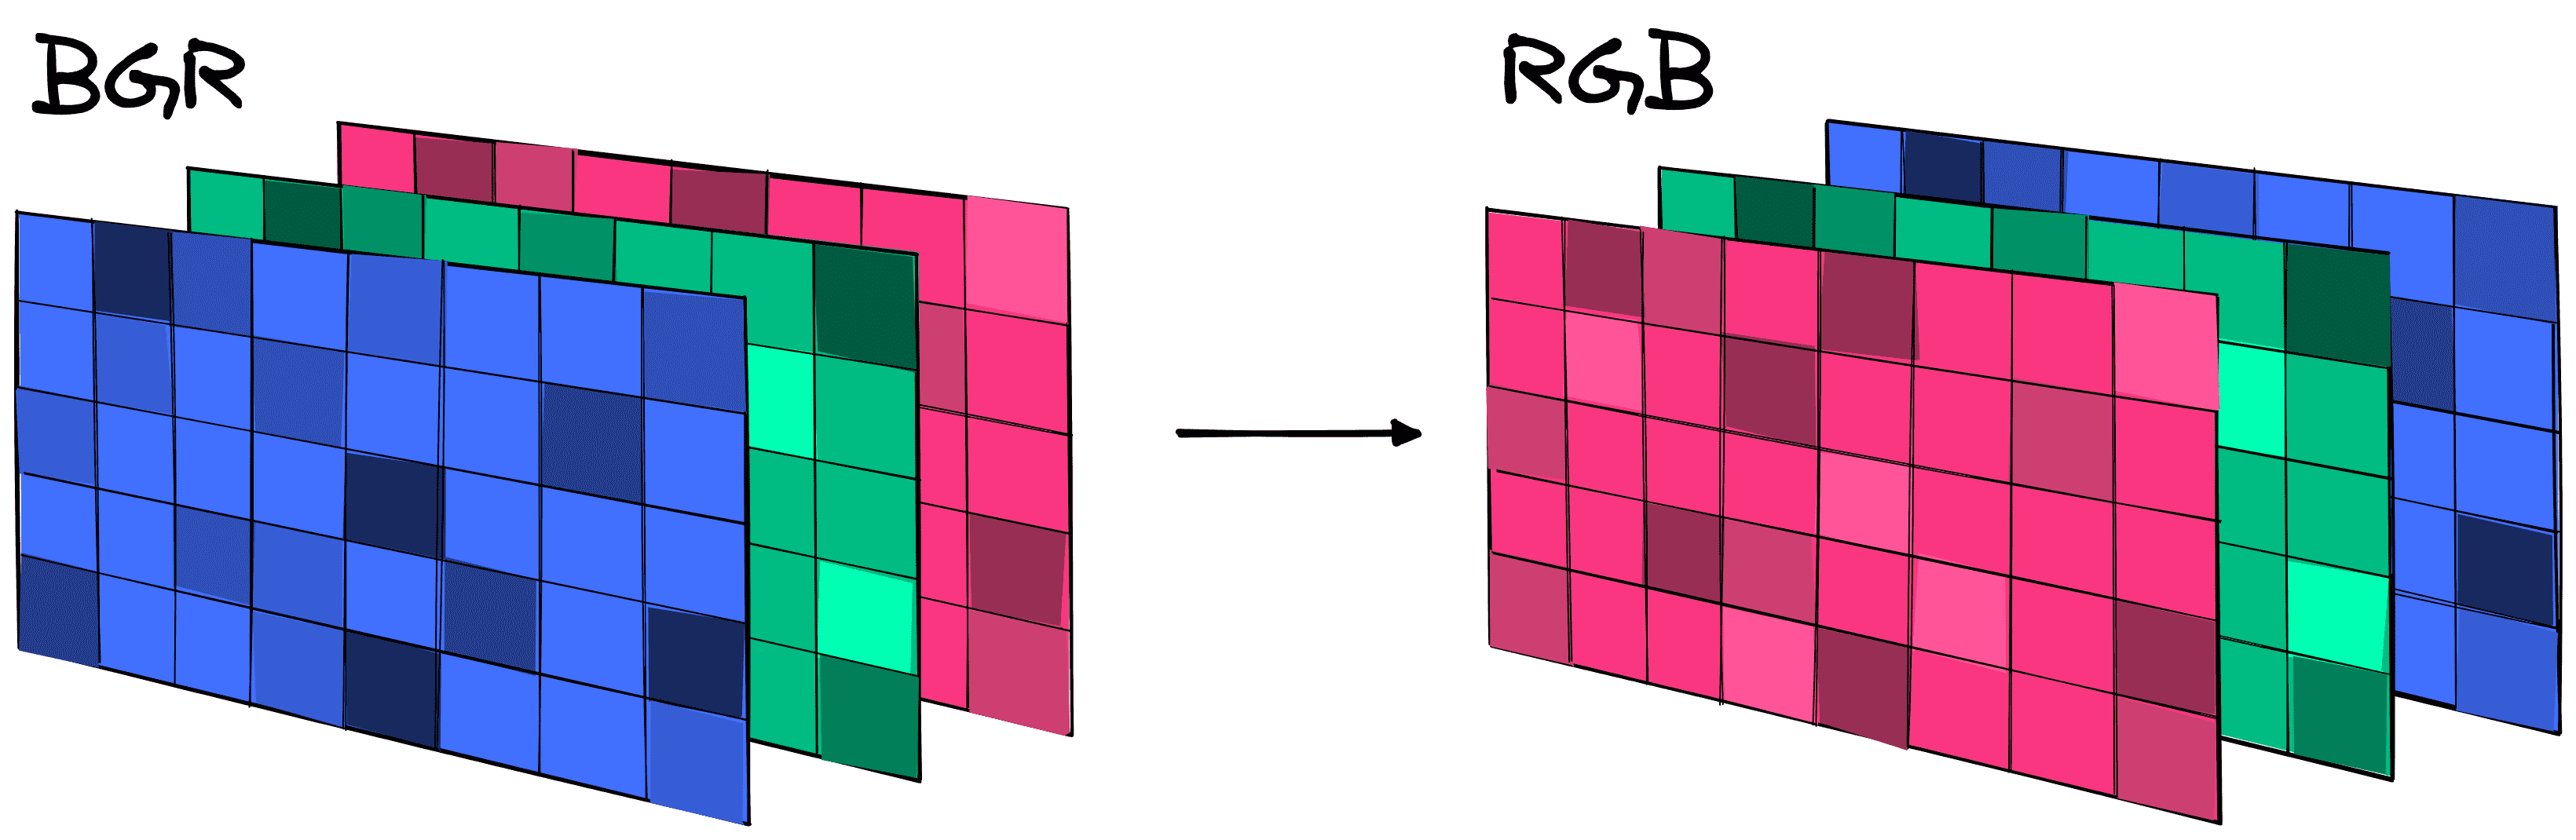 OpenCV reads images using BGR format, we flip the arrays to RGB so that we can view the true color image in matplotlib.